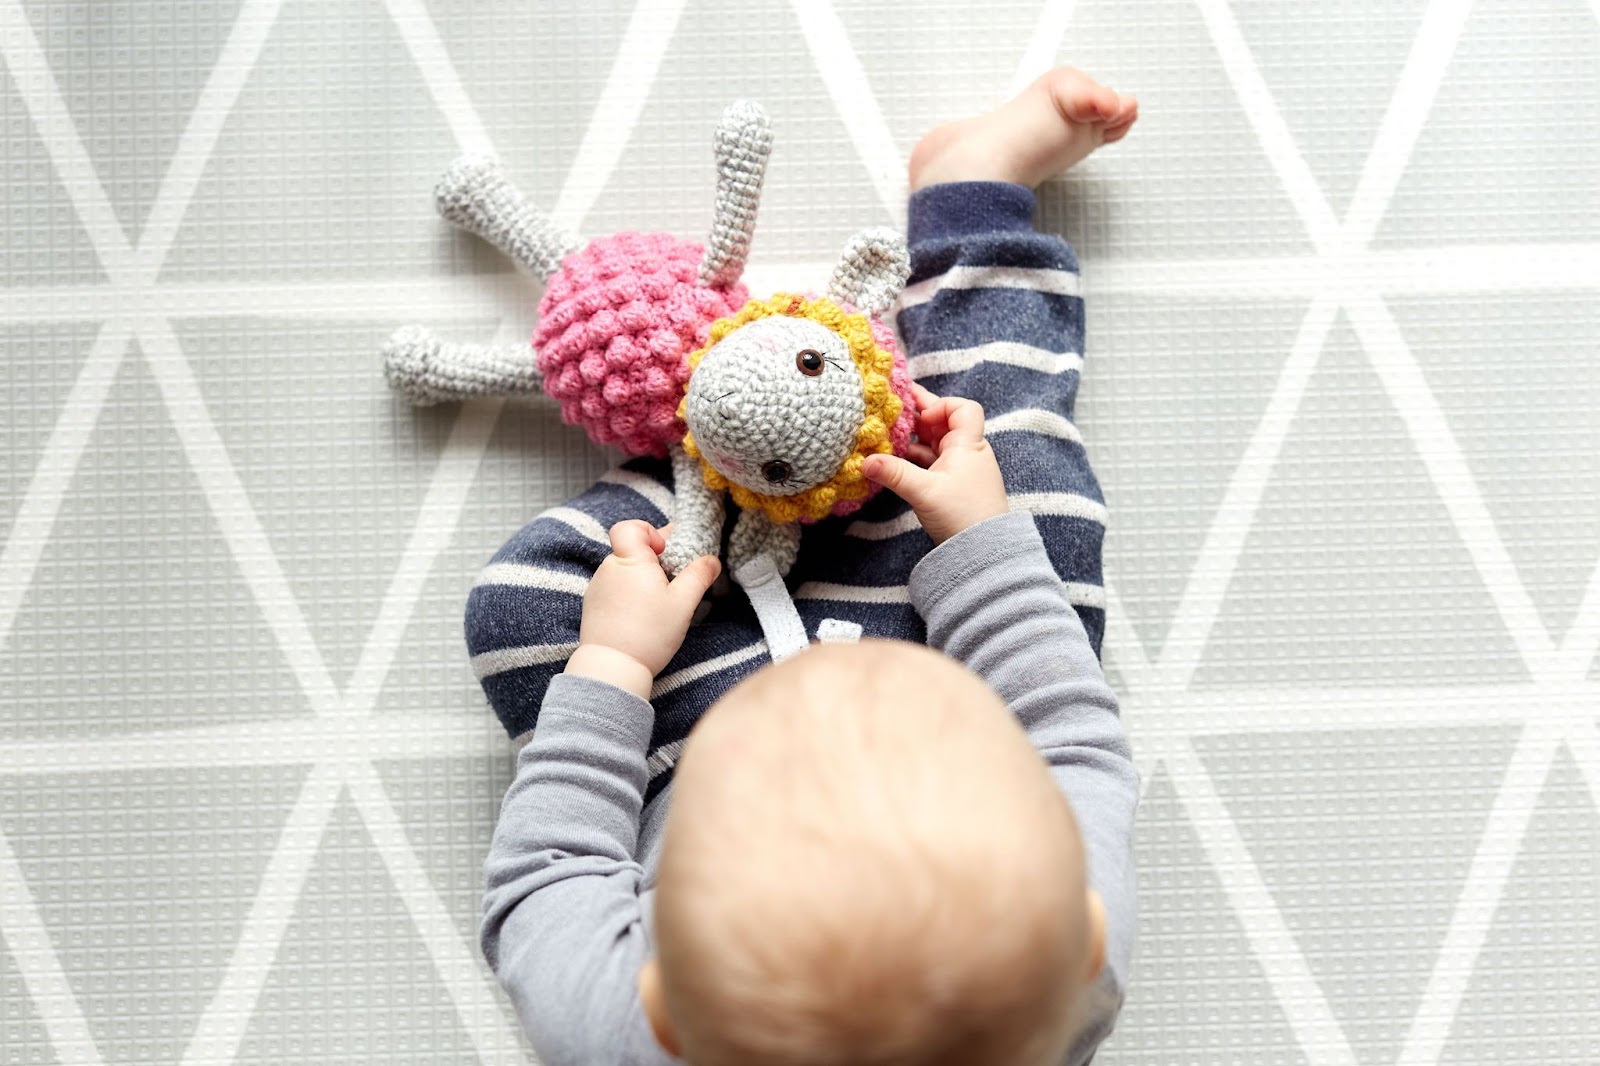 little-baby-playing-knit-toy-sheep